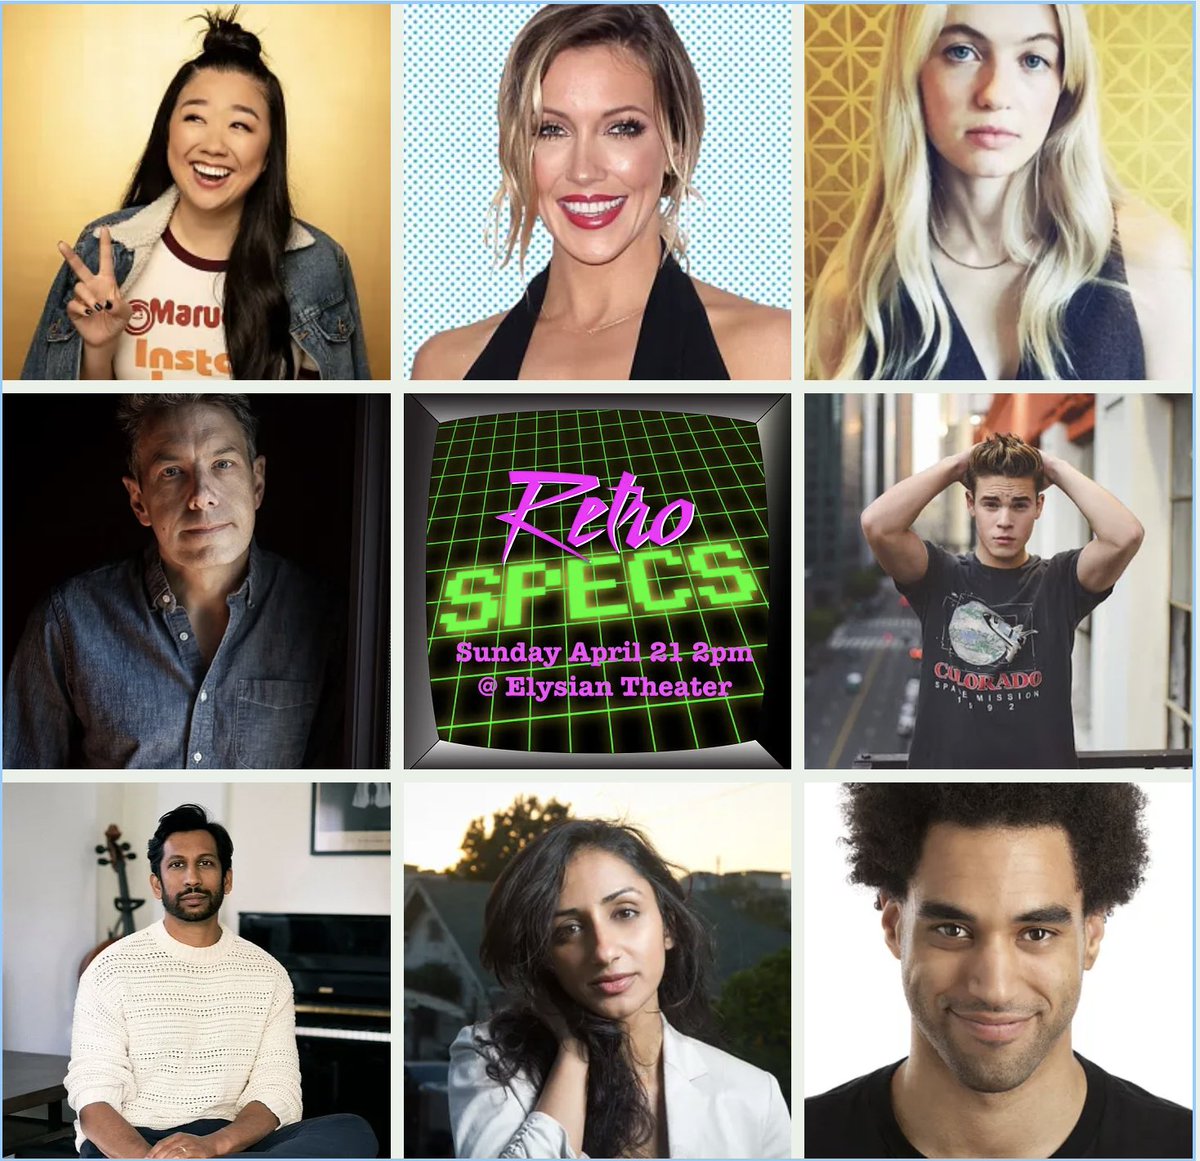 THRILLED to announce additions to this Sunday's RETROSPECS show: @JasonWGeorge @electrolemon JIM BEAVER + DEBBY RYAN join previously announced cast incl Katie Cassidy, Sherry Cola, Olivia Scott Welch @shitfromkiran + more! Get tix now: tinyurl.com/Retro421